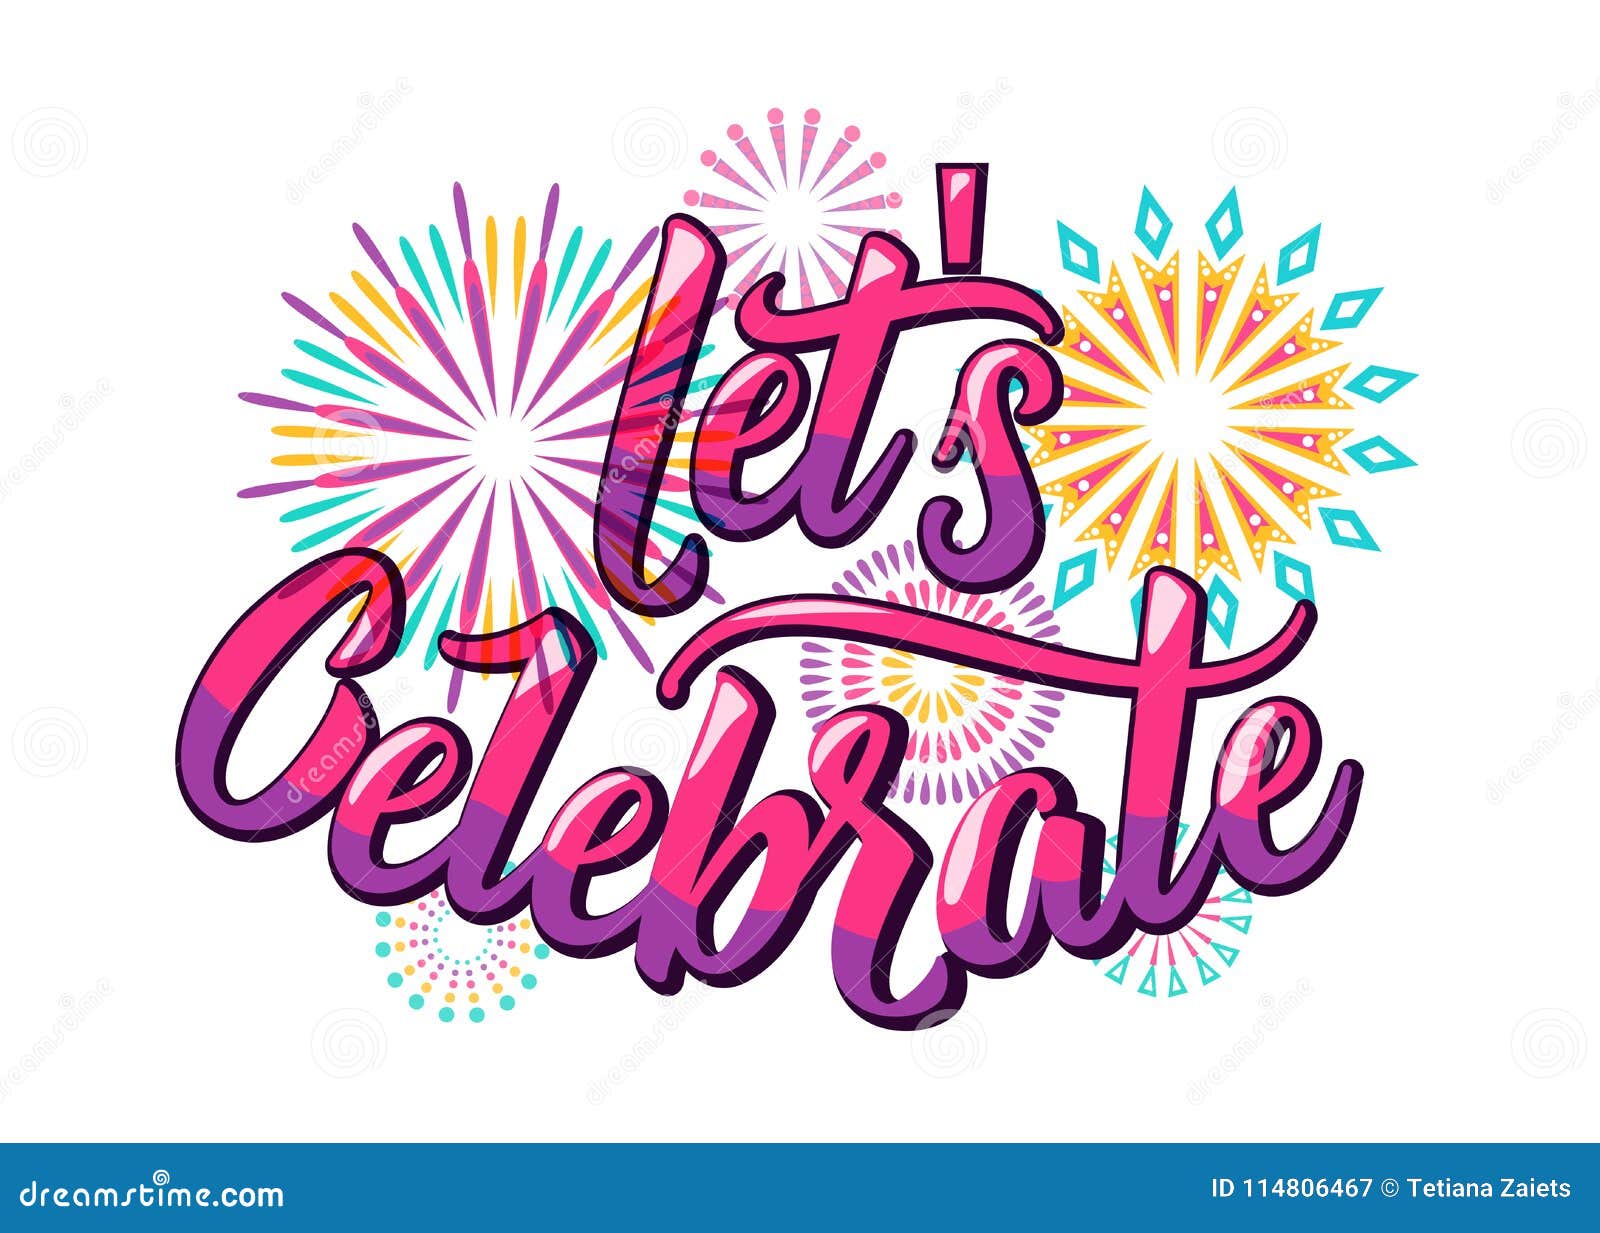 lets celebrate background with color letters and fireworks in flat style